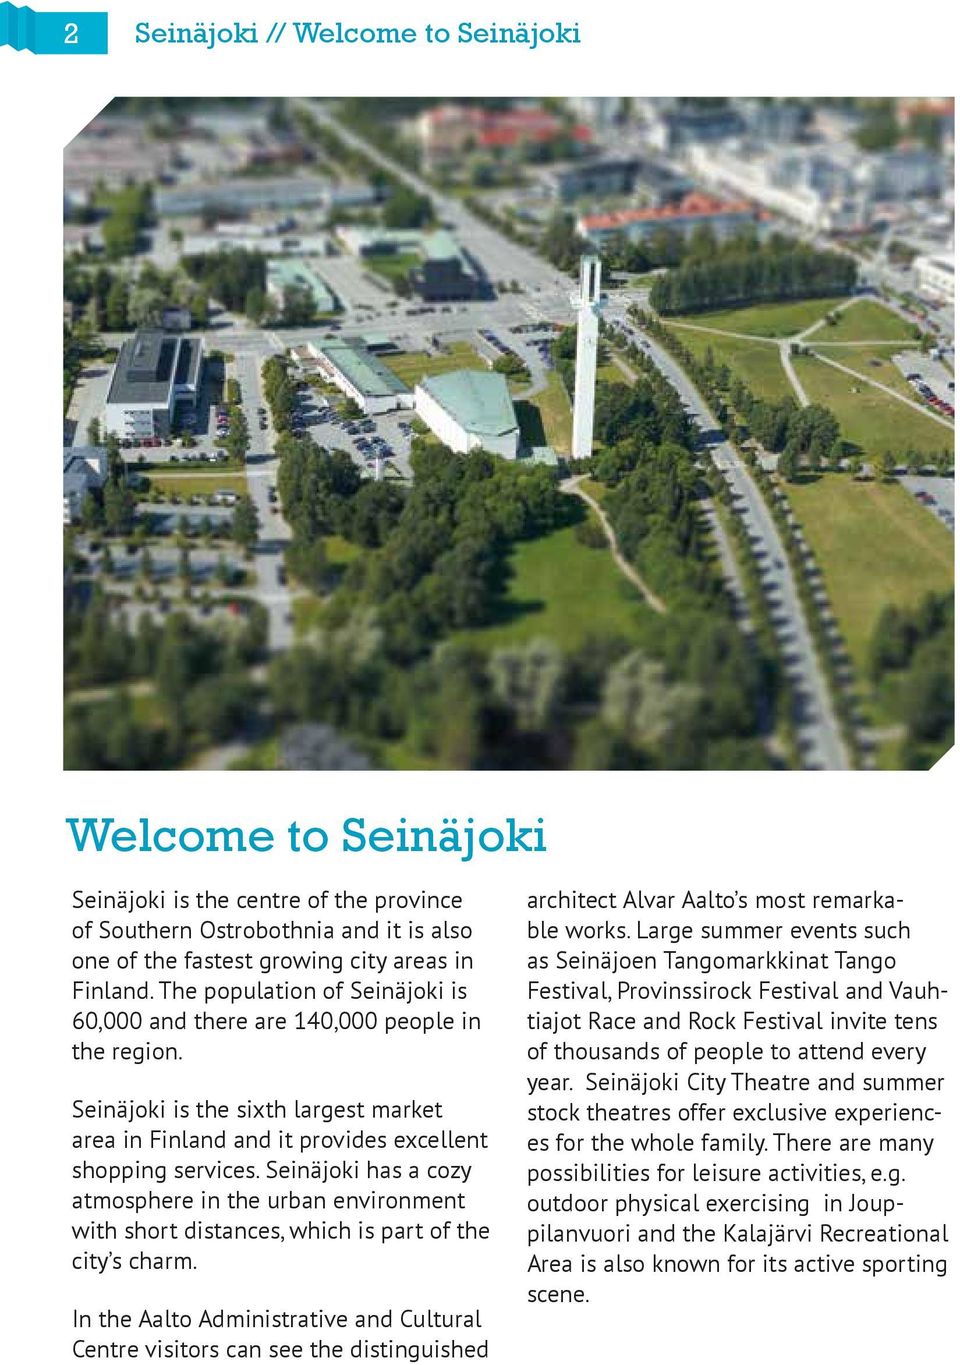 Seinäjoki has a cozy atmosphere in the urban environment with short distances, which is part of the city s charm.